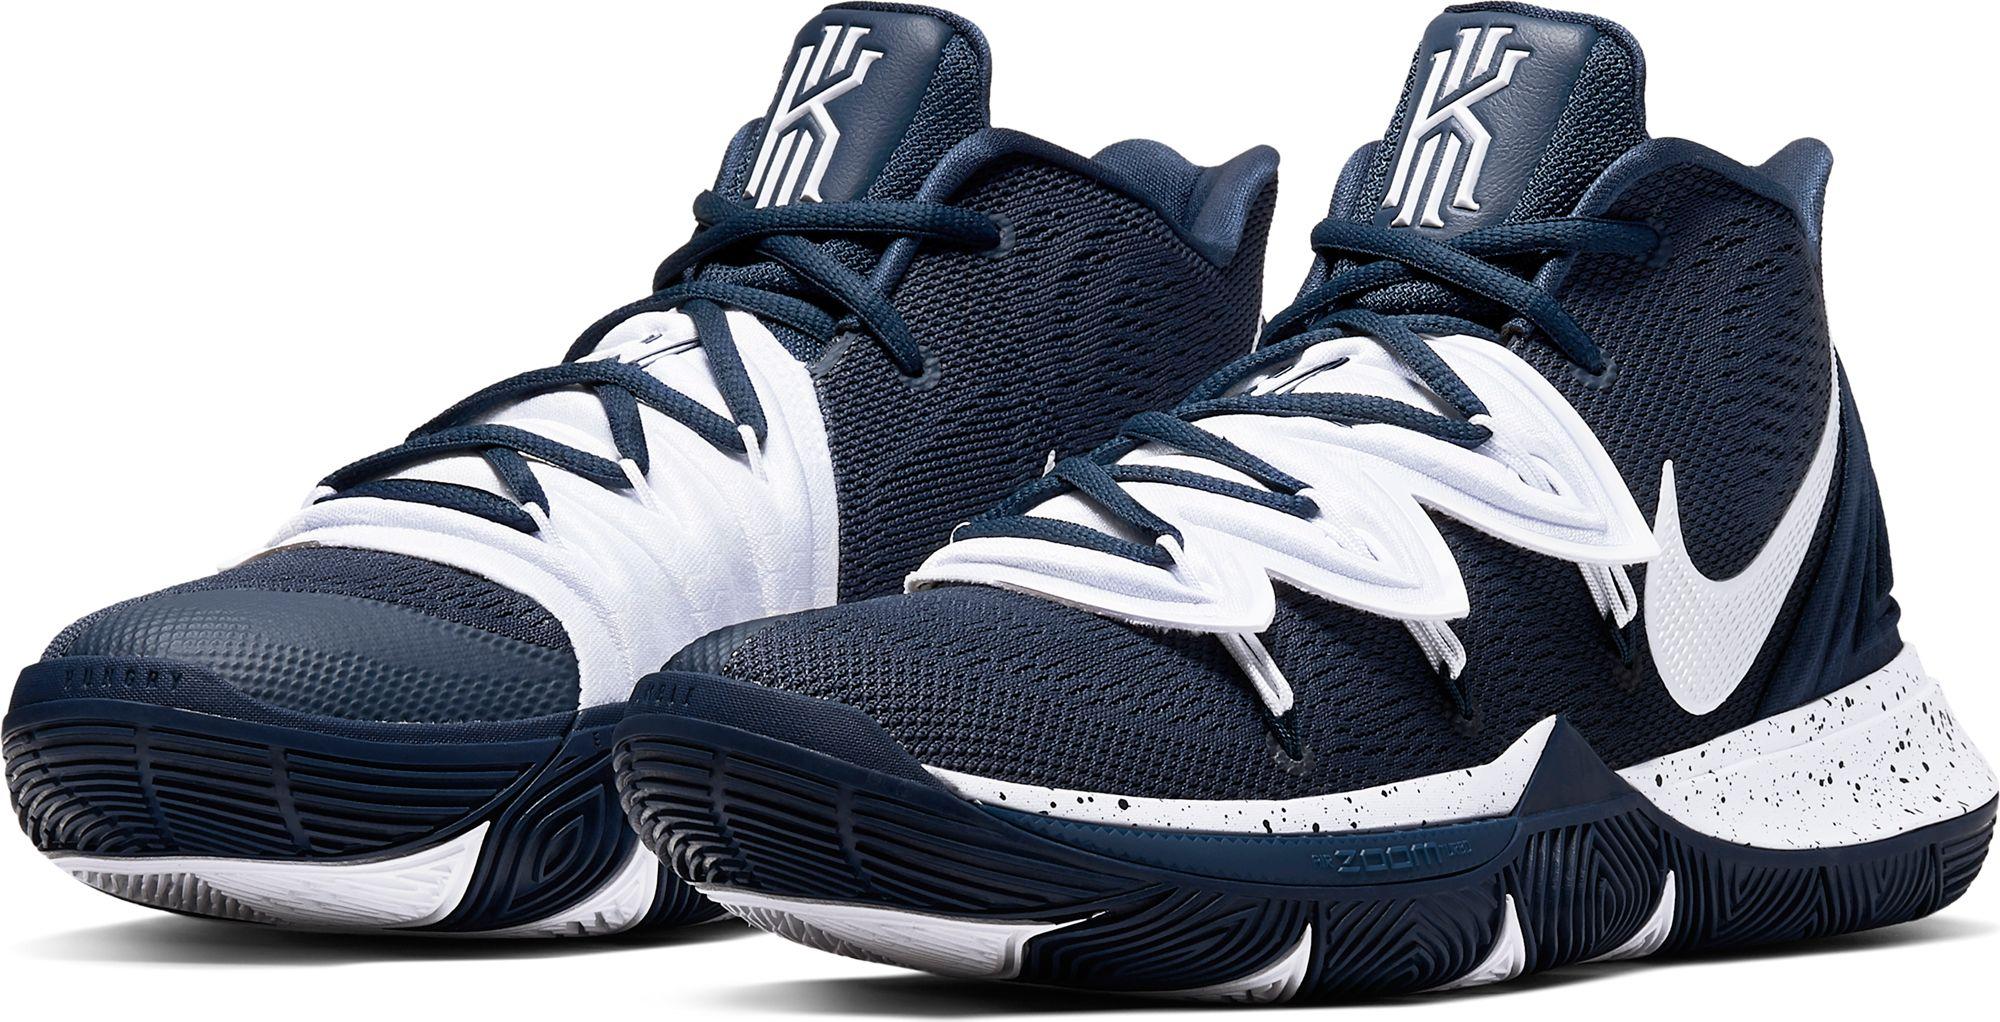 Nike Kyrie 5 Basketball Shoes in Navy 